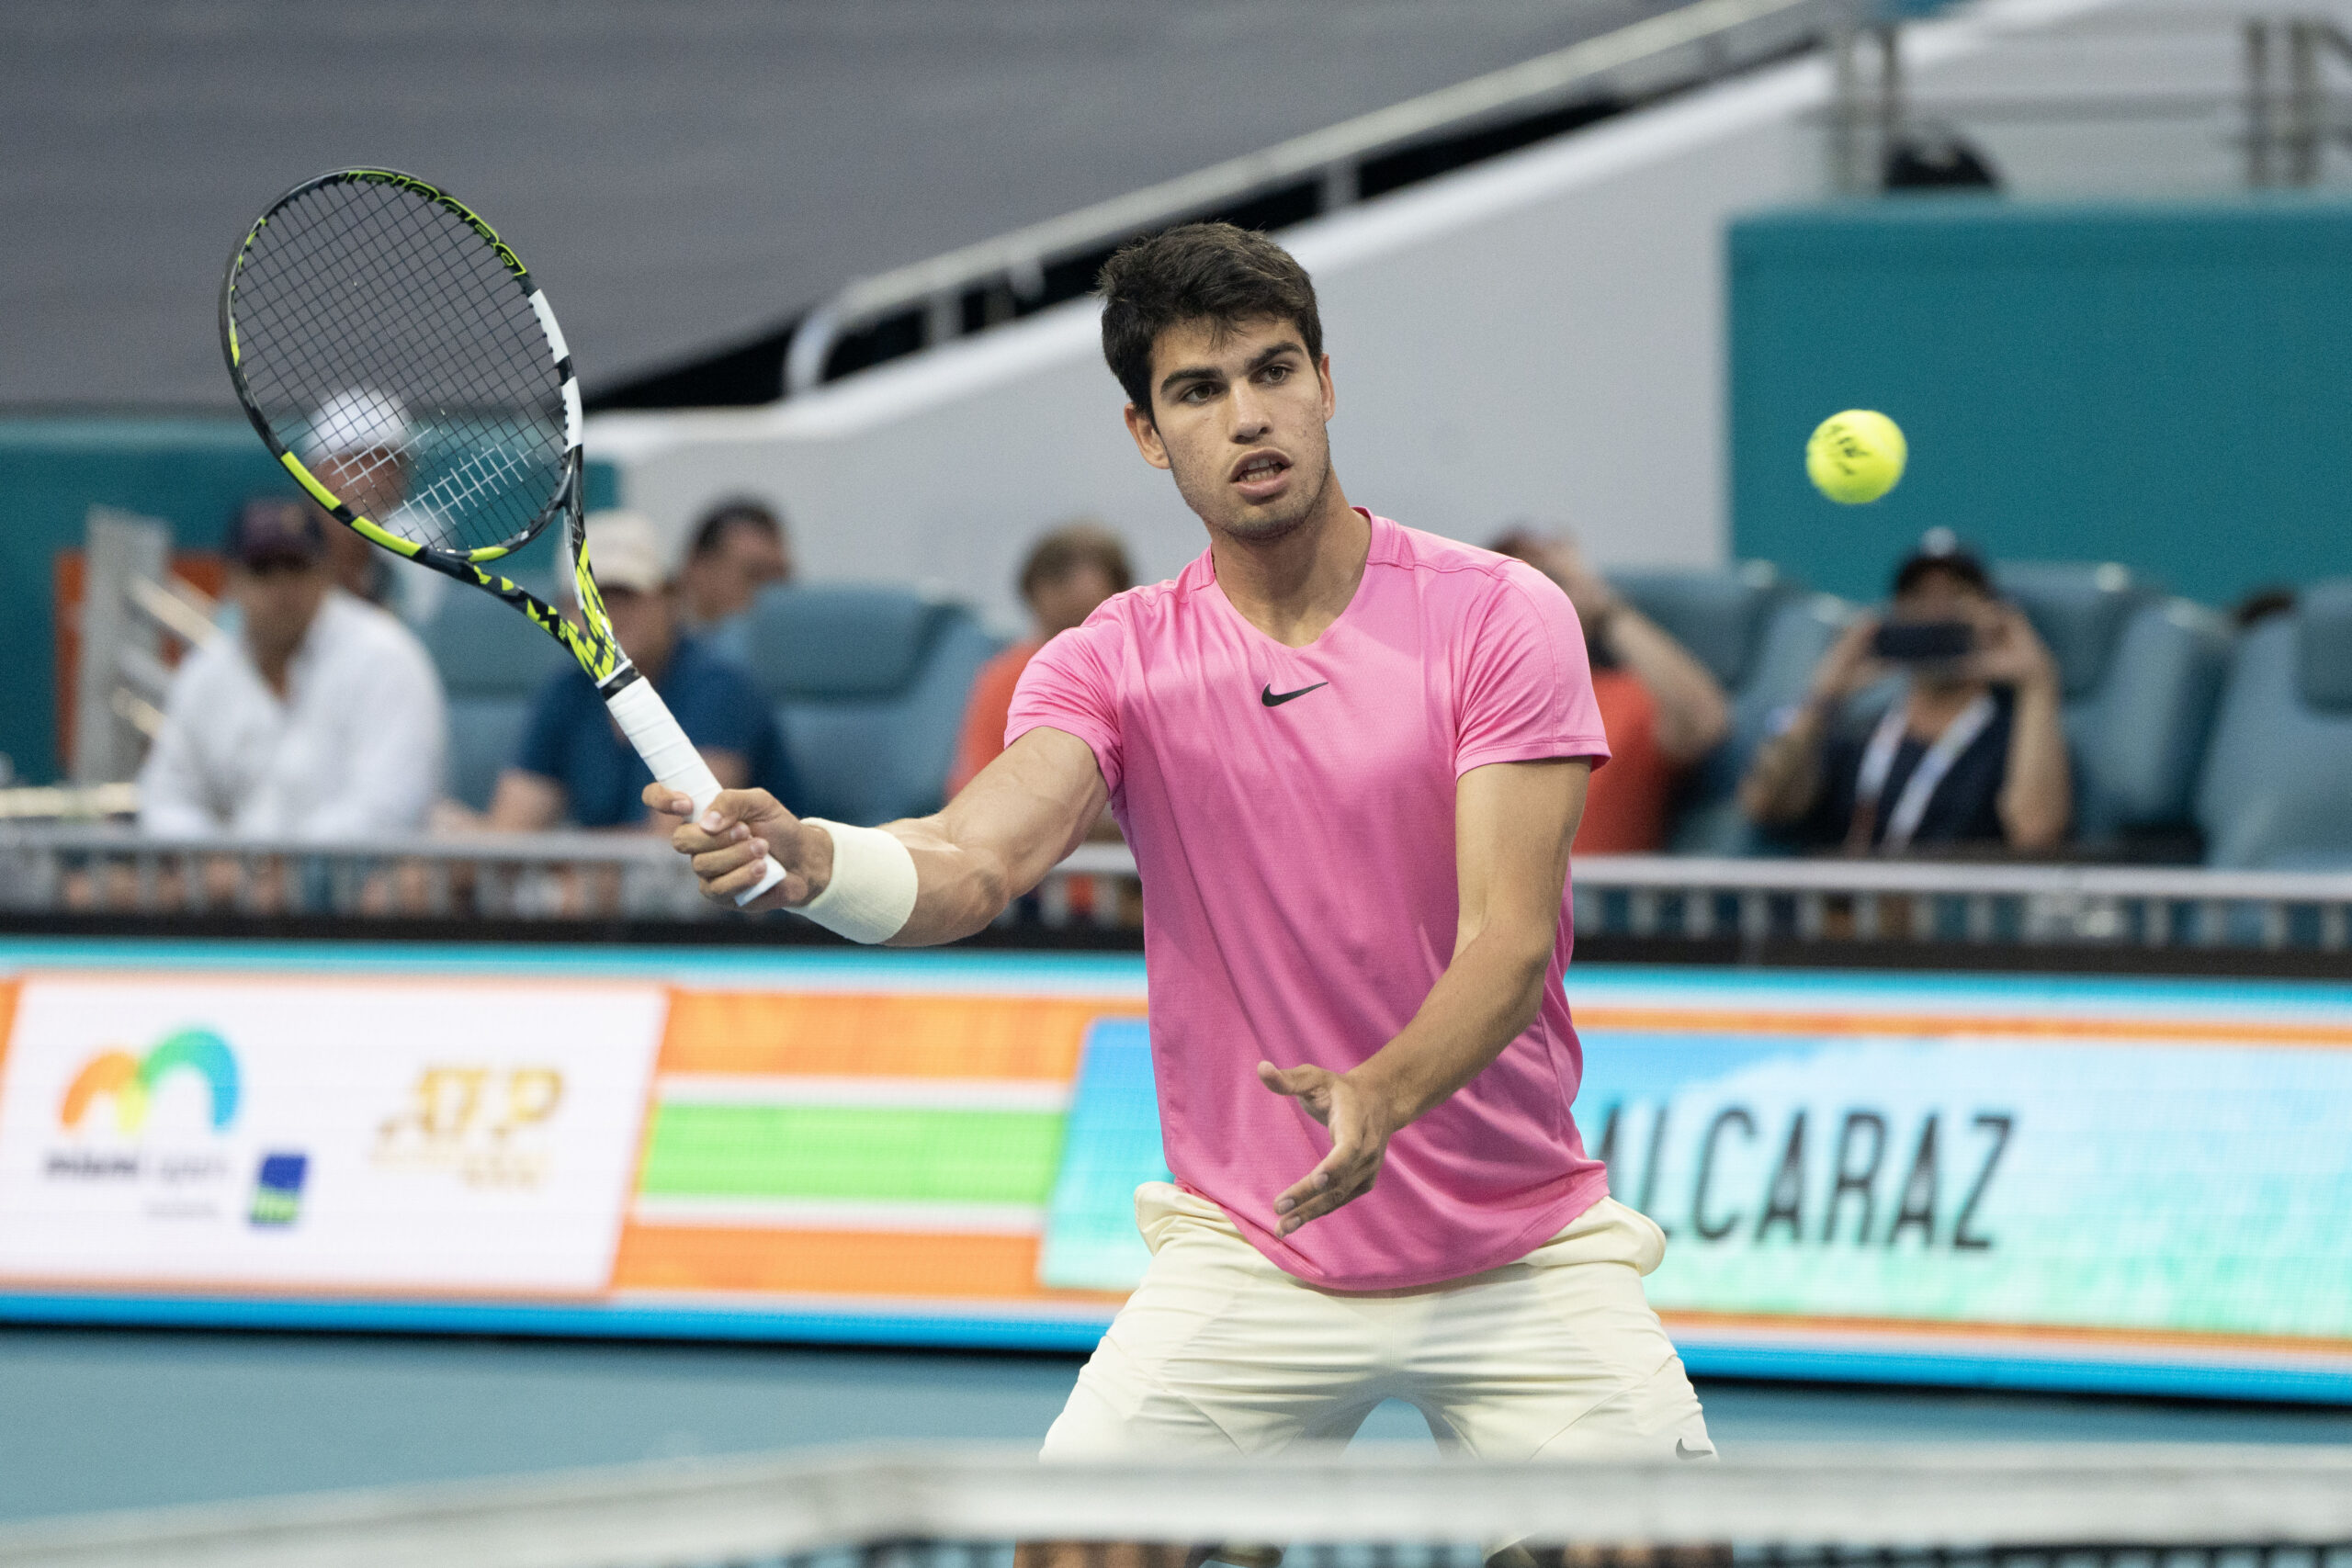 World Number One, Carlos Alcaraz, volleys during his match with Taylor Fritz at the 2023 Miami Open on March 30, 2023 in Miami Gardens, Florida.